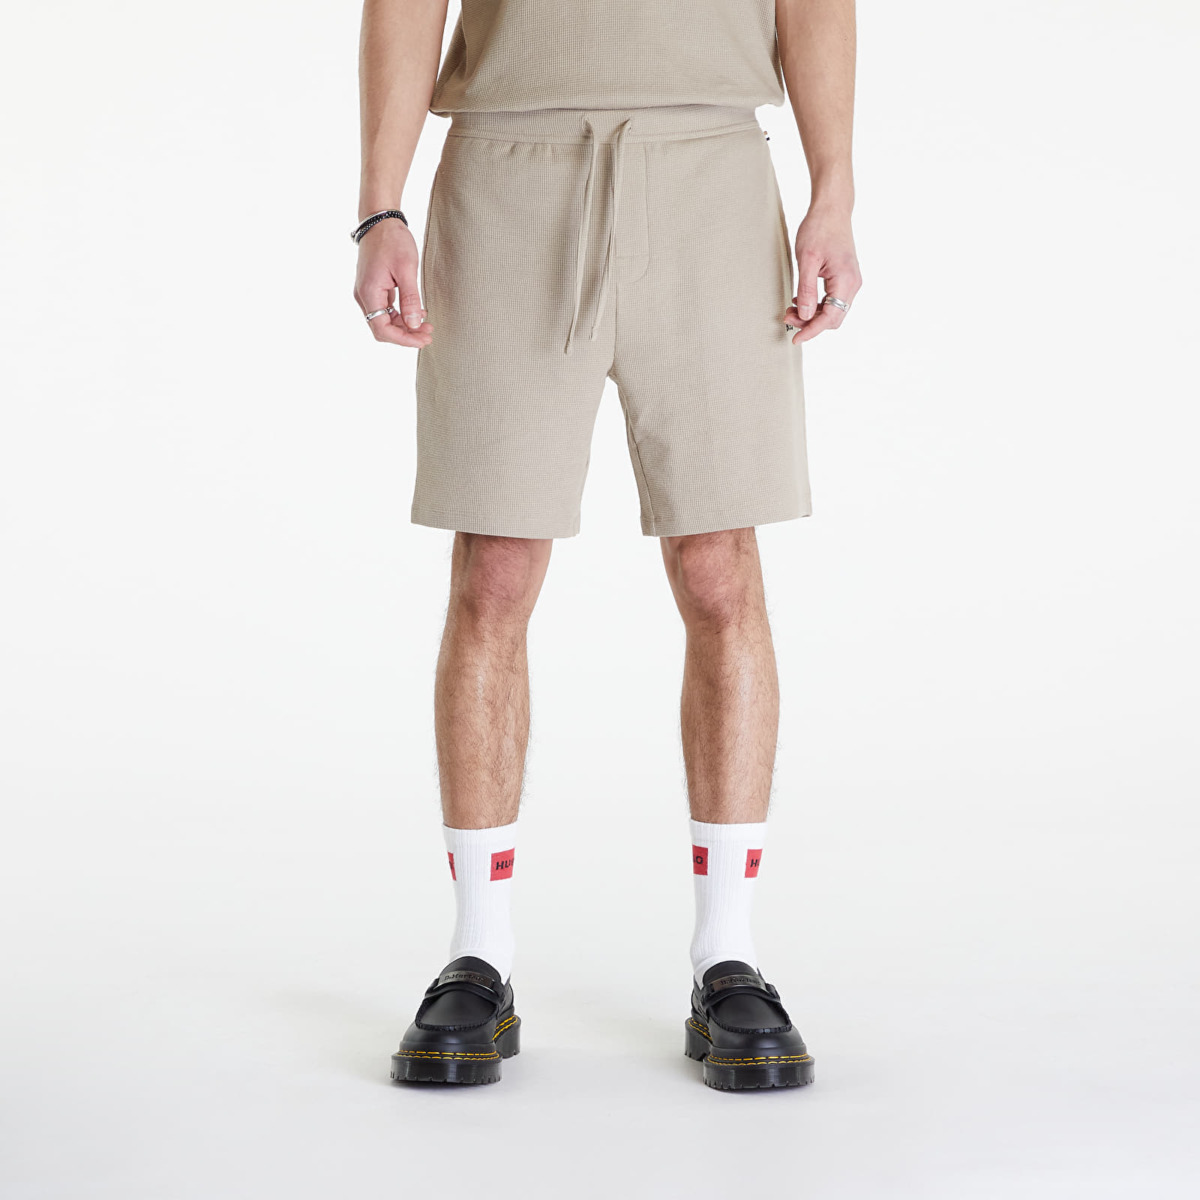 Shorts Brown for Man from Footshop GOOFASH